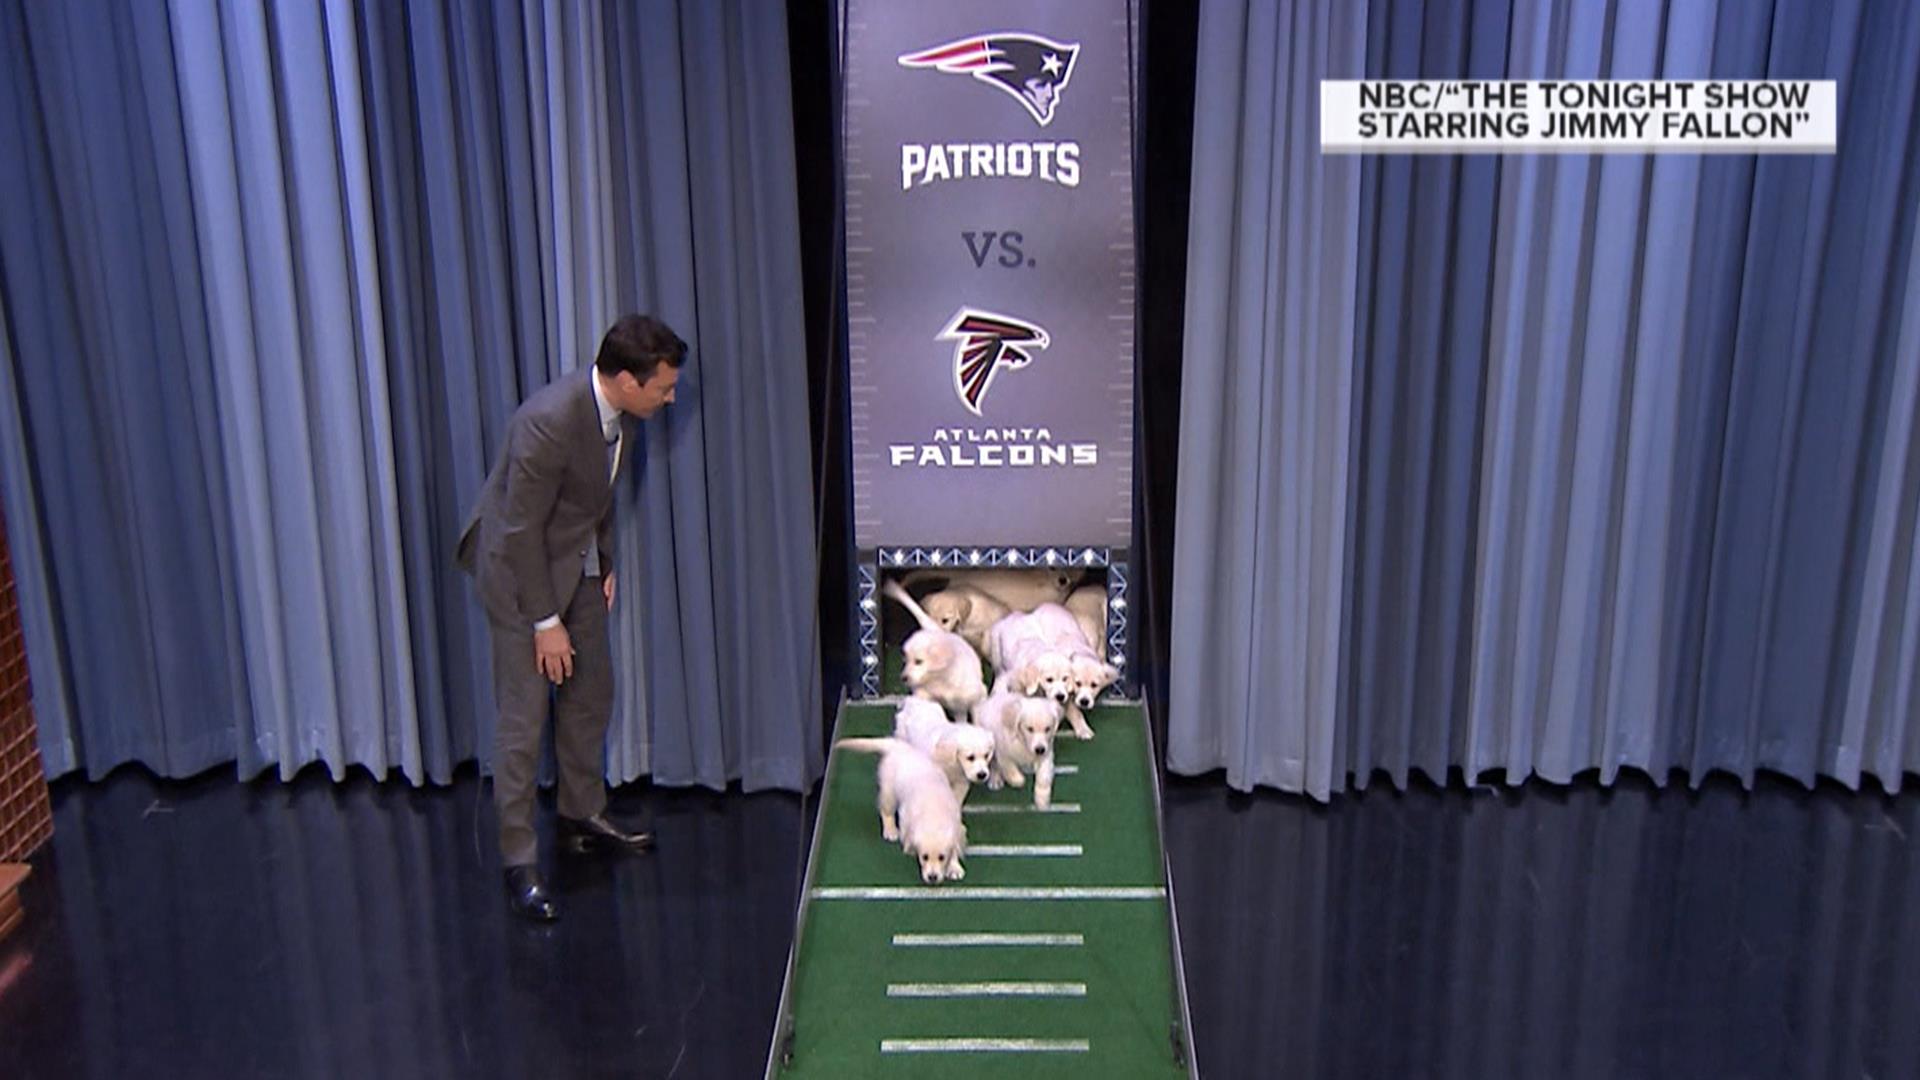 Super Bowl fever peaks (but what do Jimmy Fallon's puppies predict?)